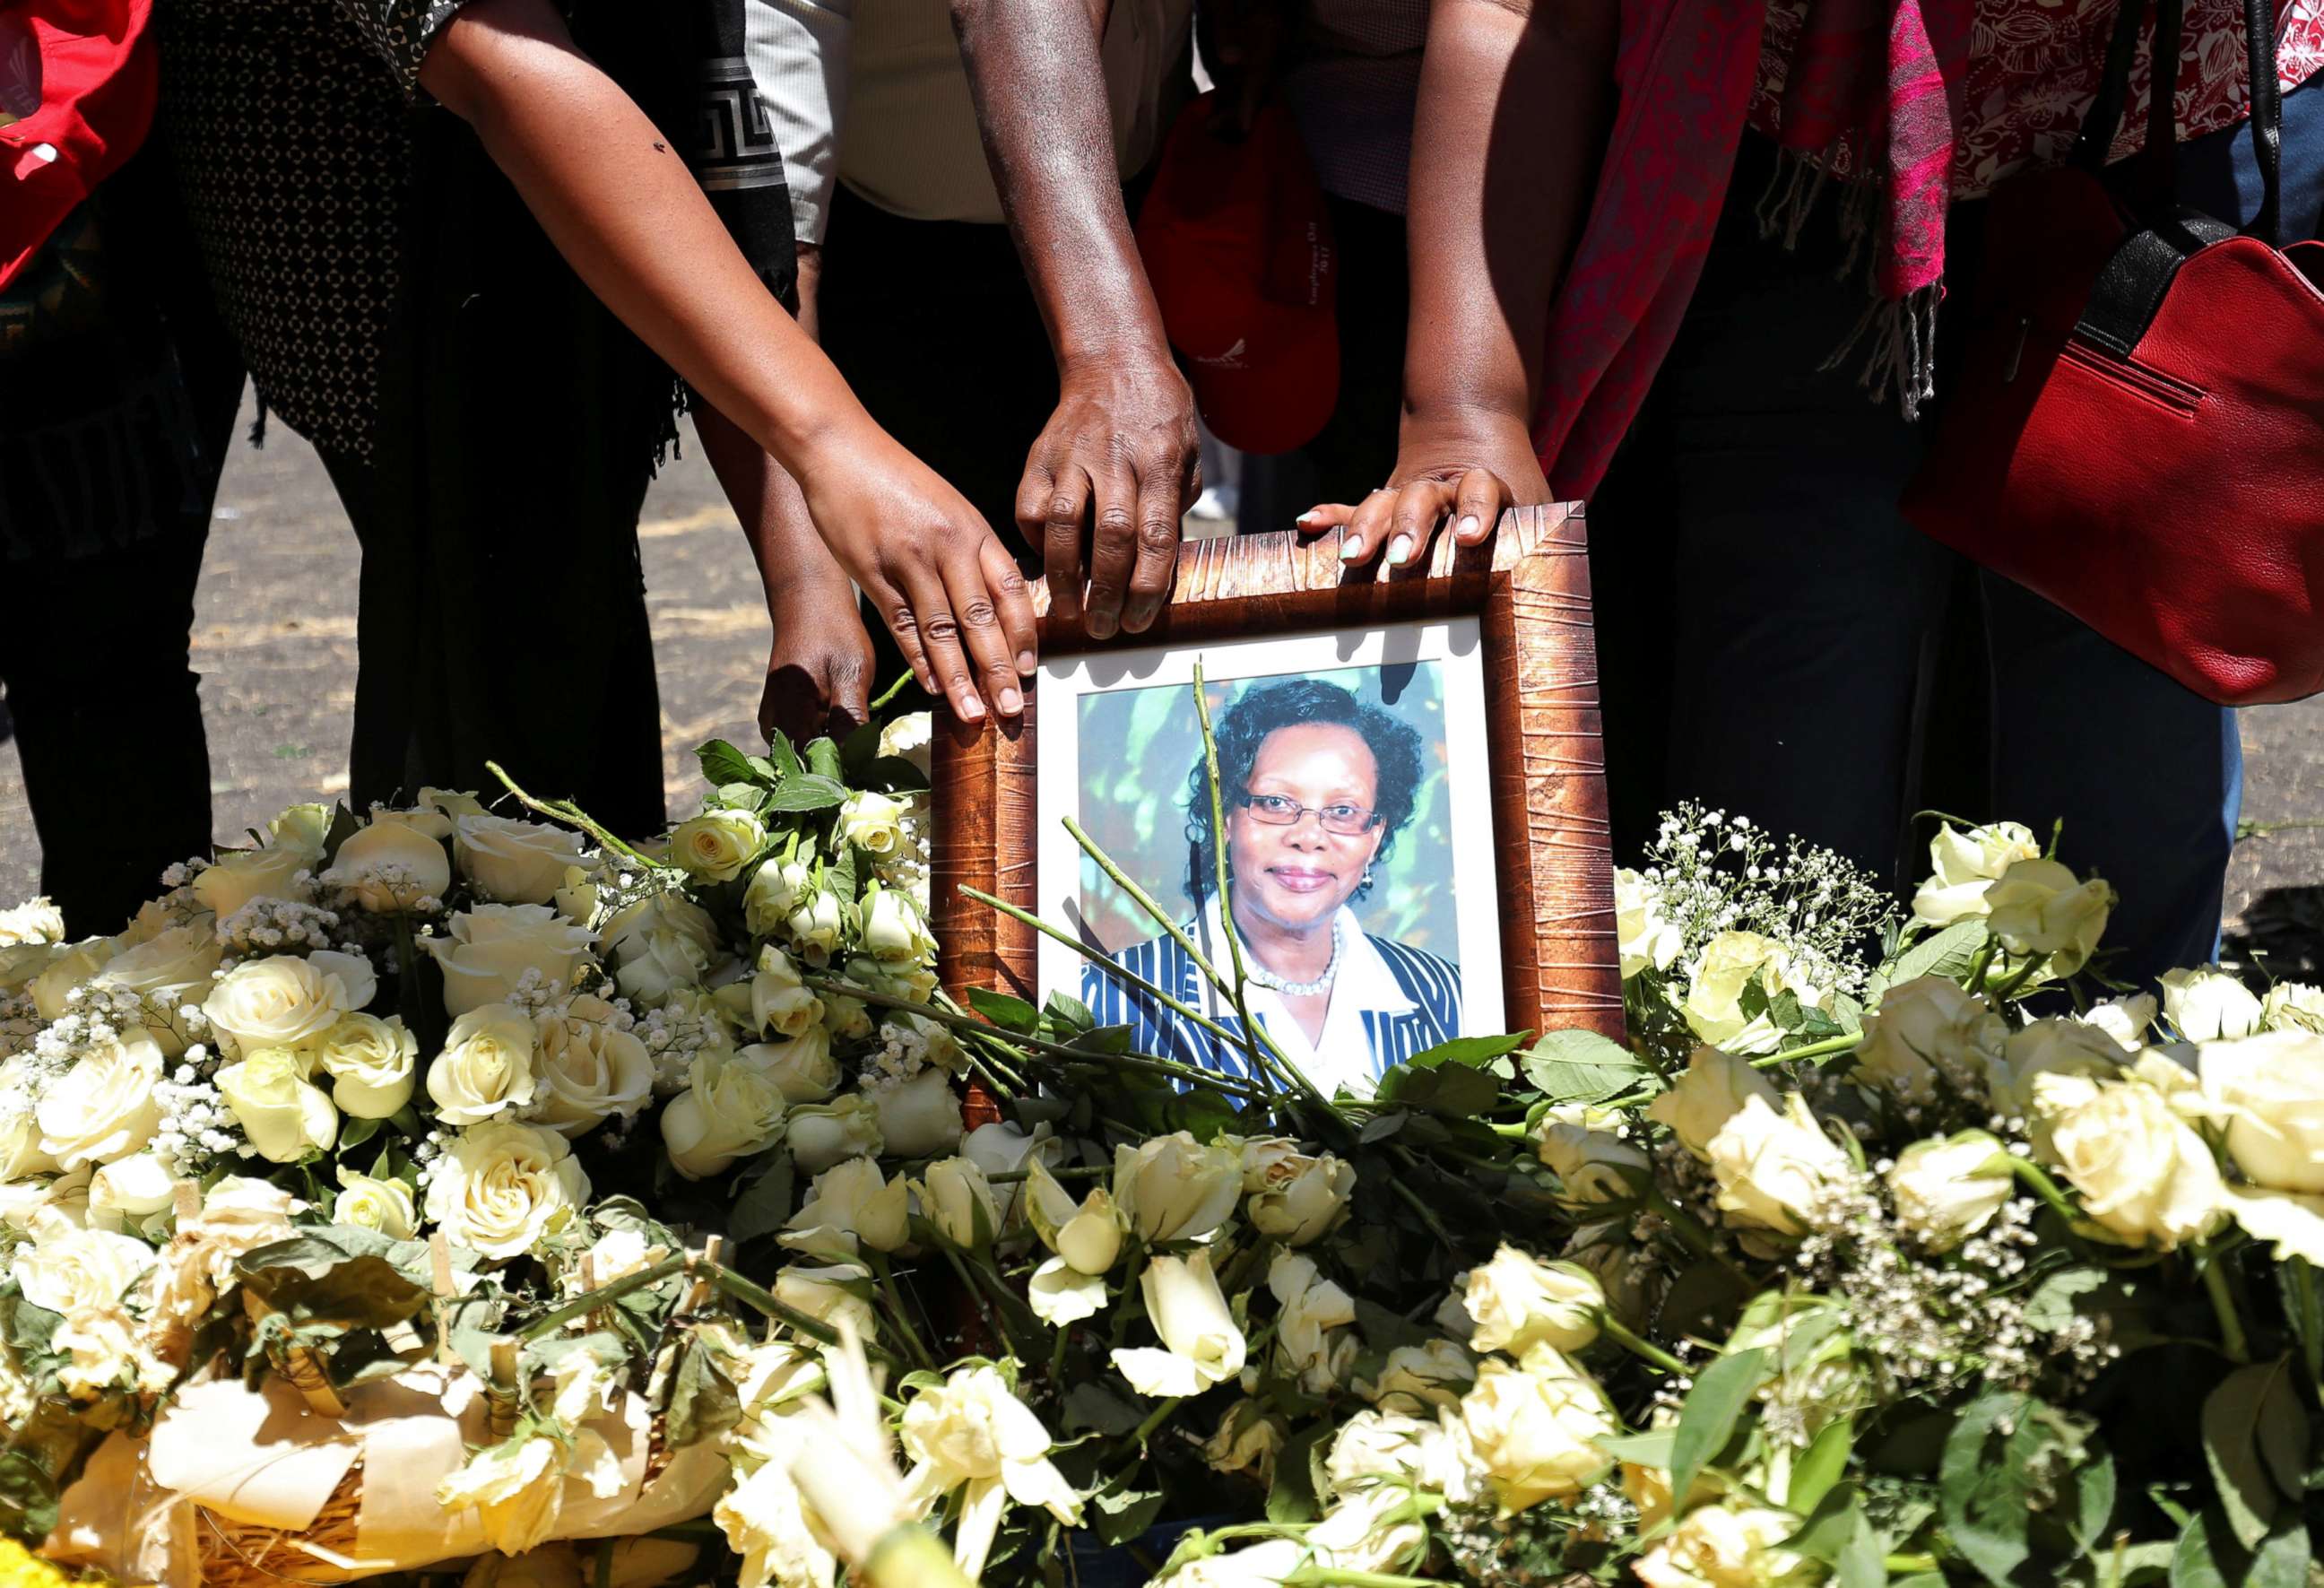 PHOTO: United Nations workers hold a portrait as they mourn their colleagues during a commemoration ceremony for the victims at the scene of the Ethiopian Airlines Flight ET 302 plane crash, near Addis Ababa, Ethiopia March 15, 2019.